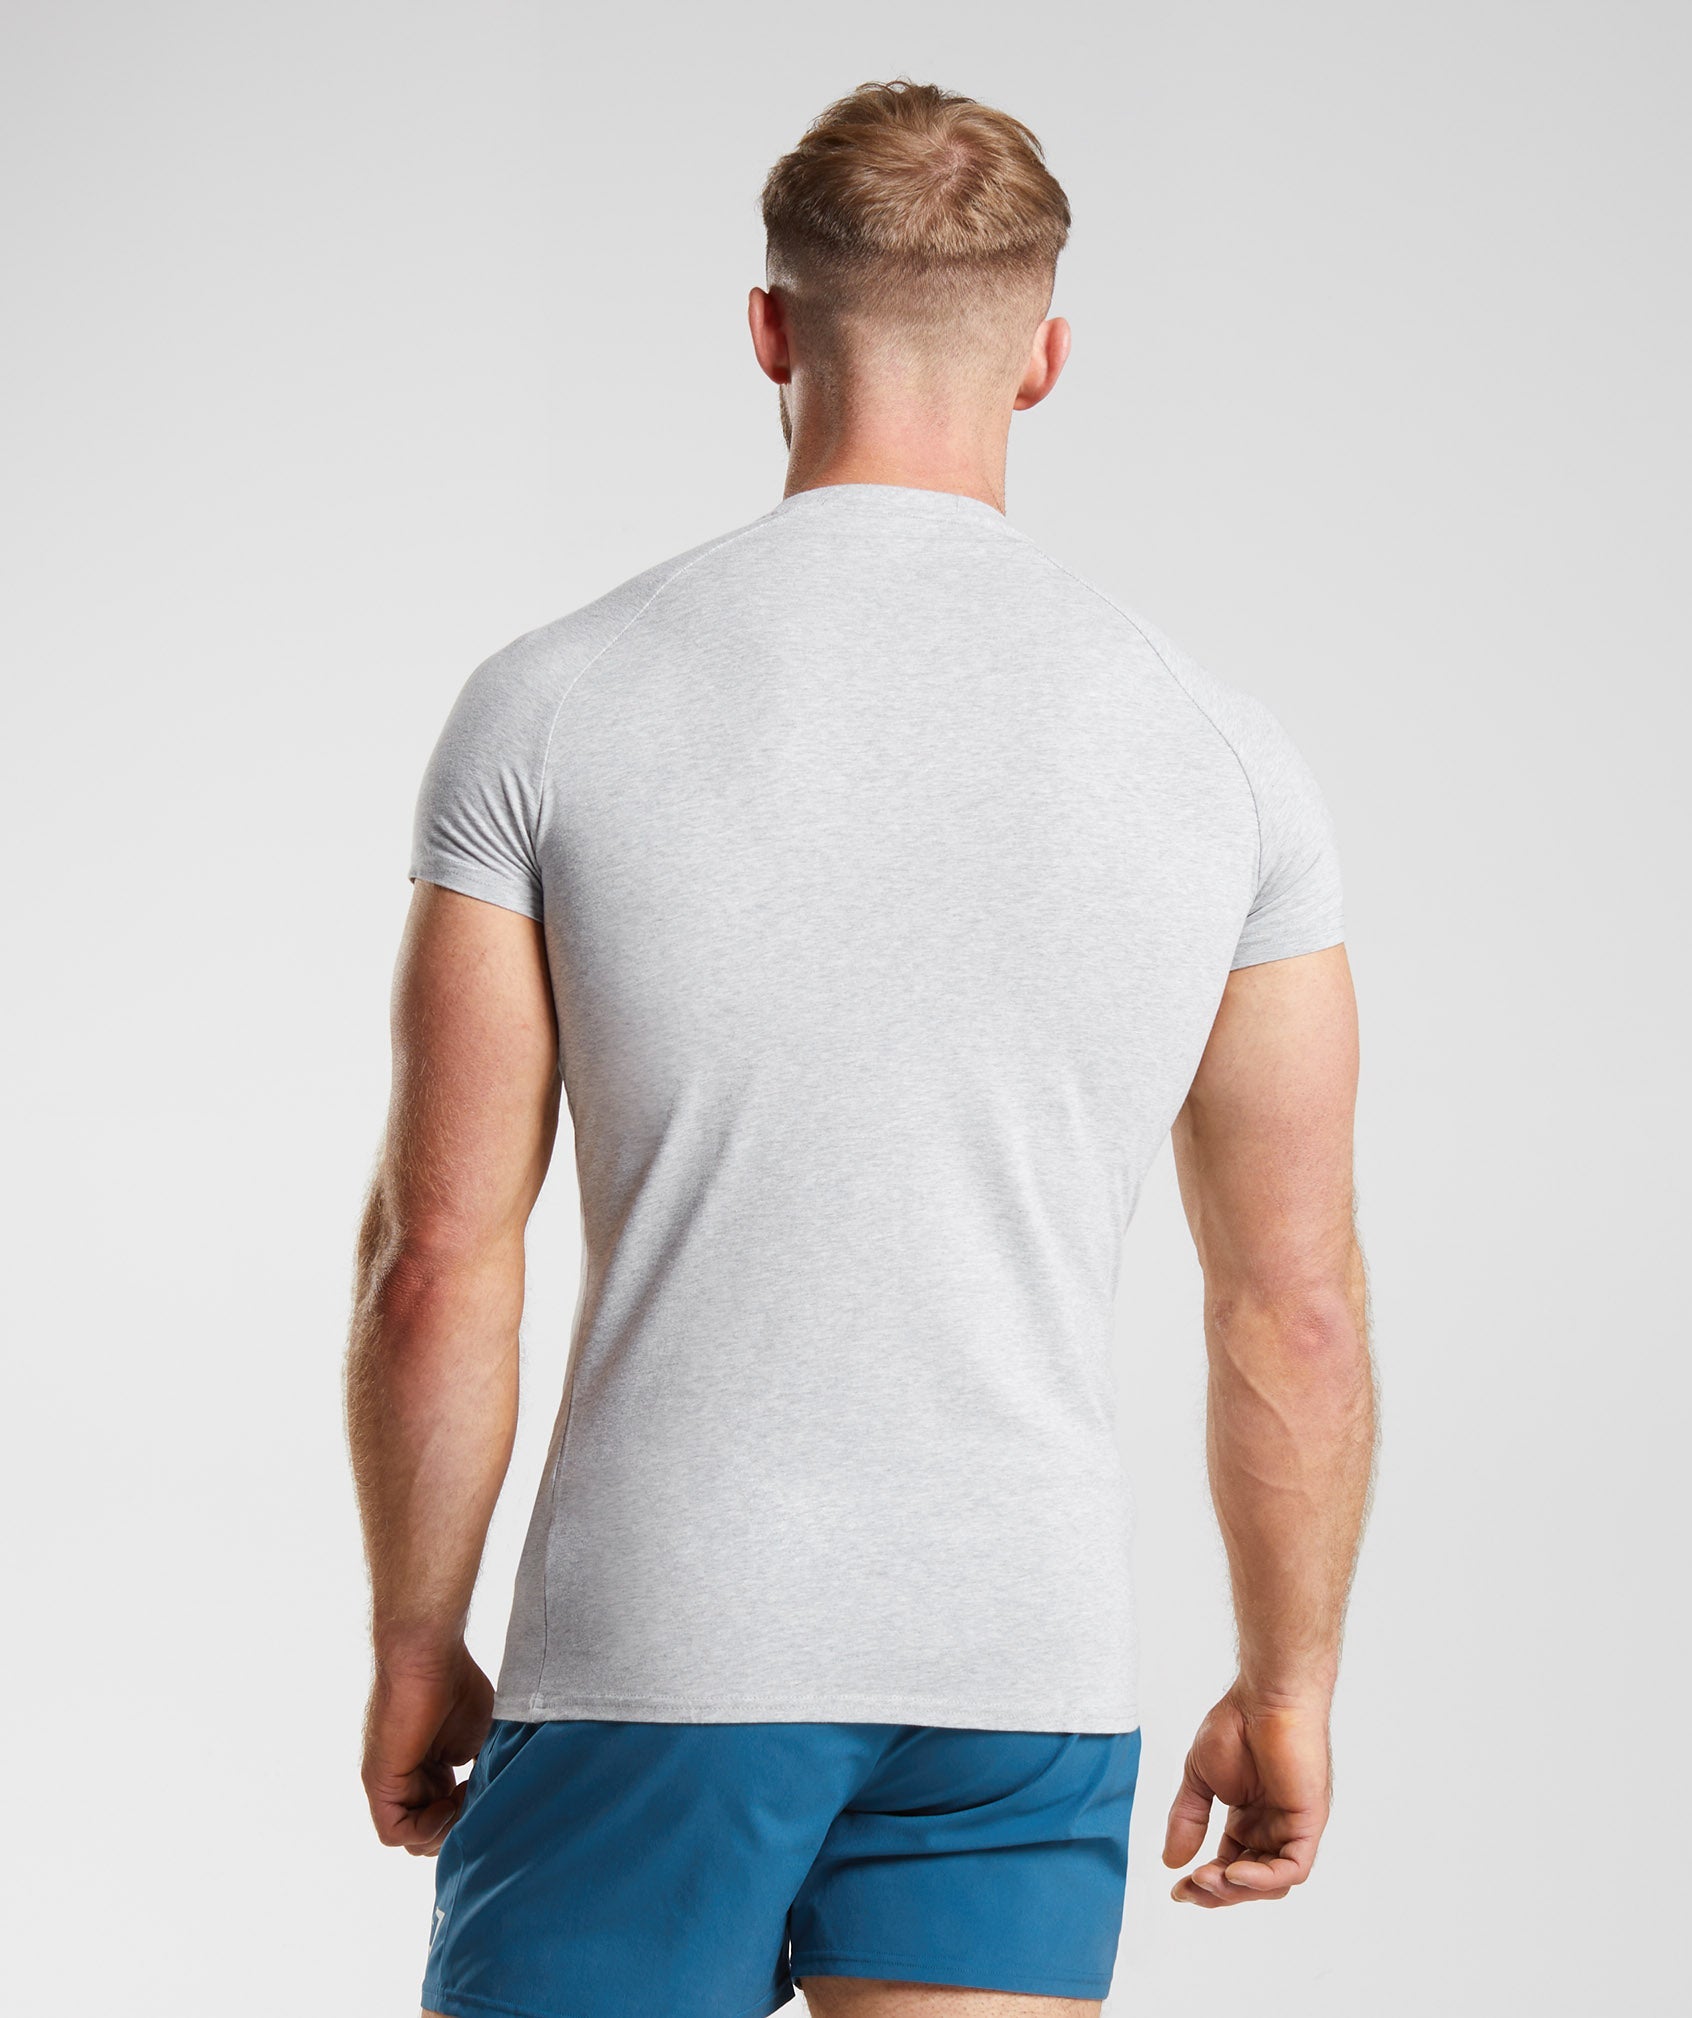 Apollo T-Shirt in Light Grey Marl - view 2